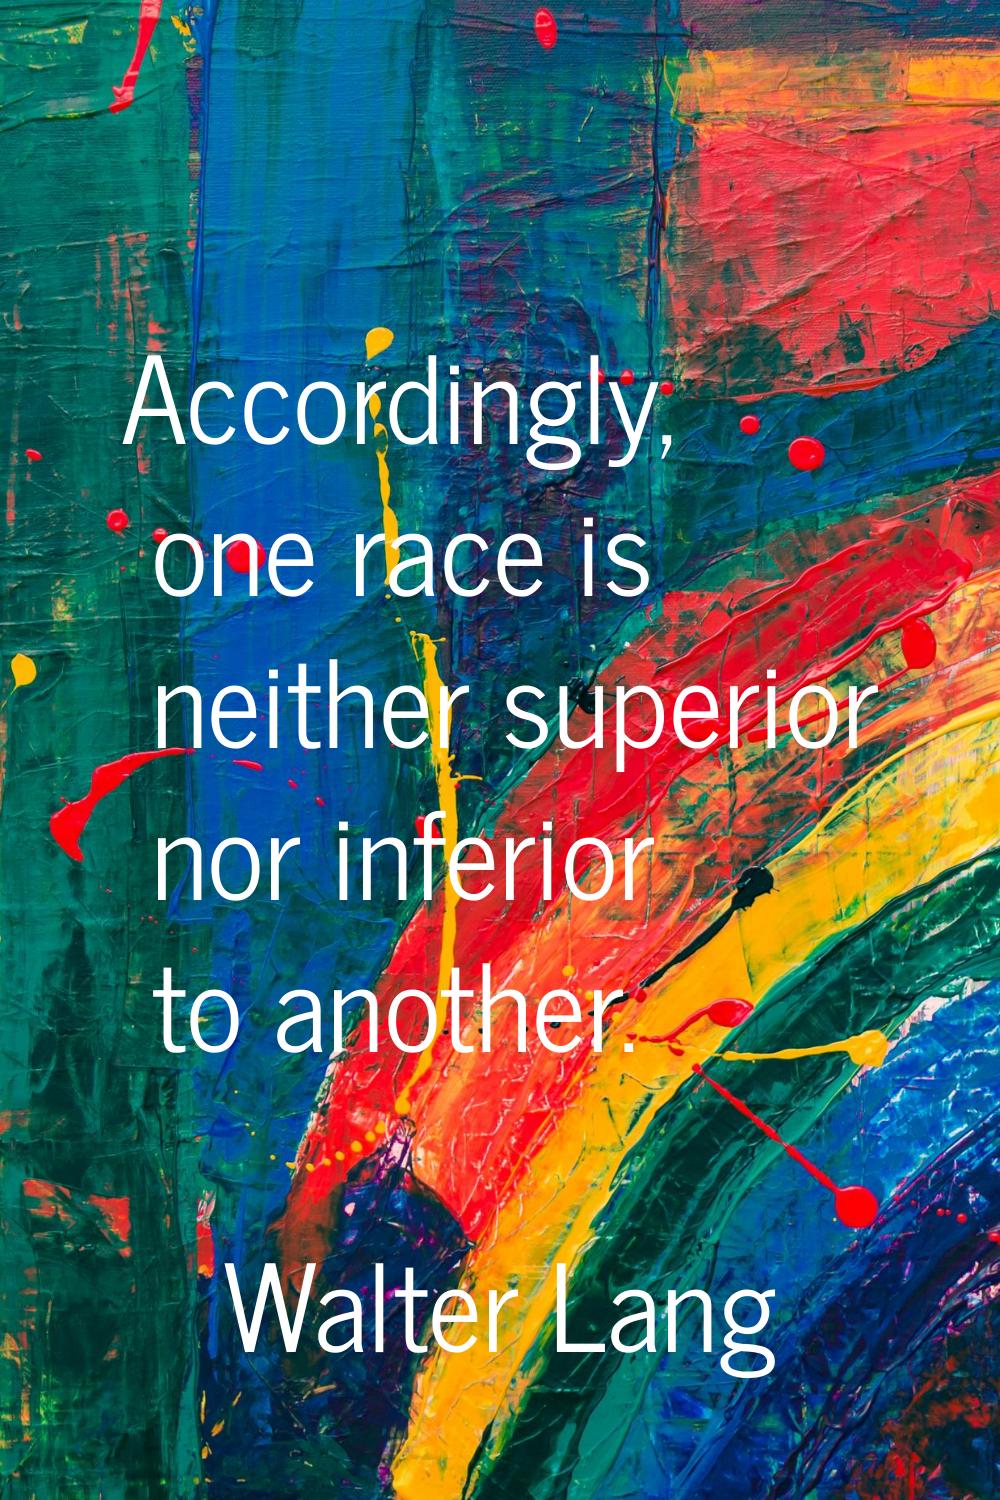 Accordingly, one race is neither superior nor inferior to another.